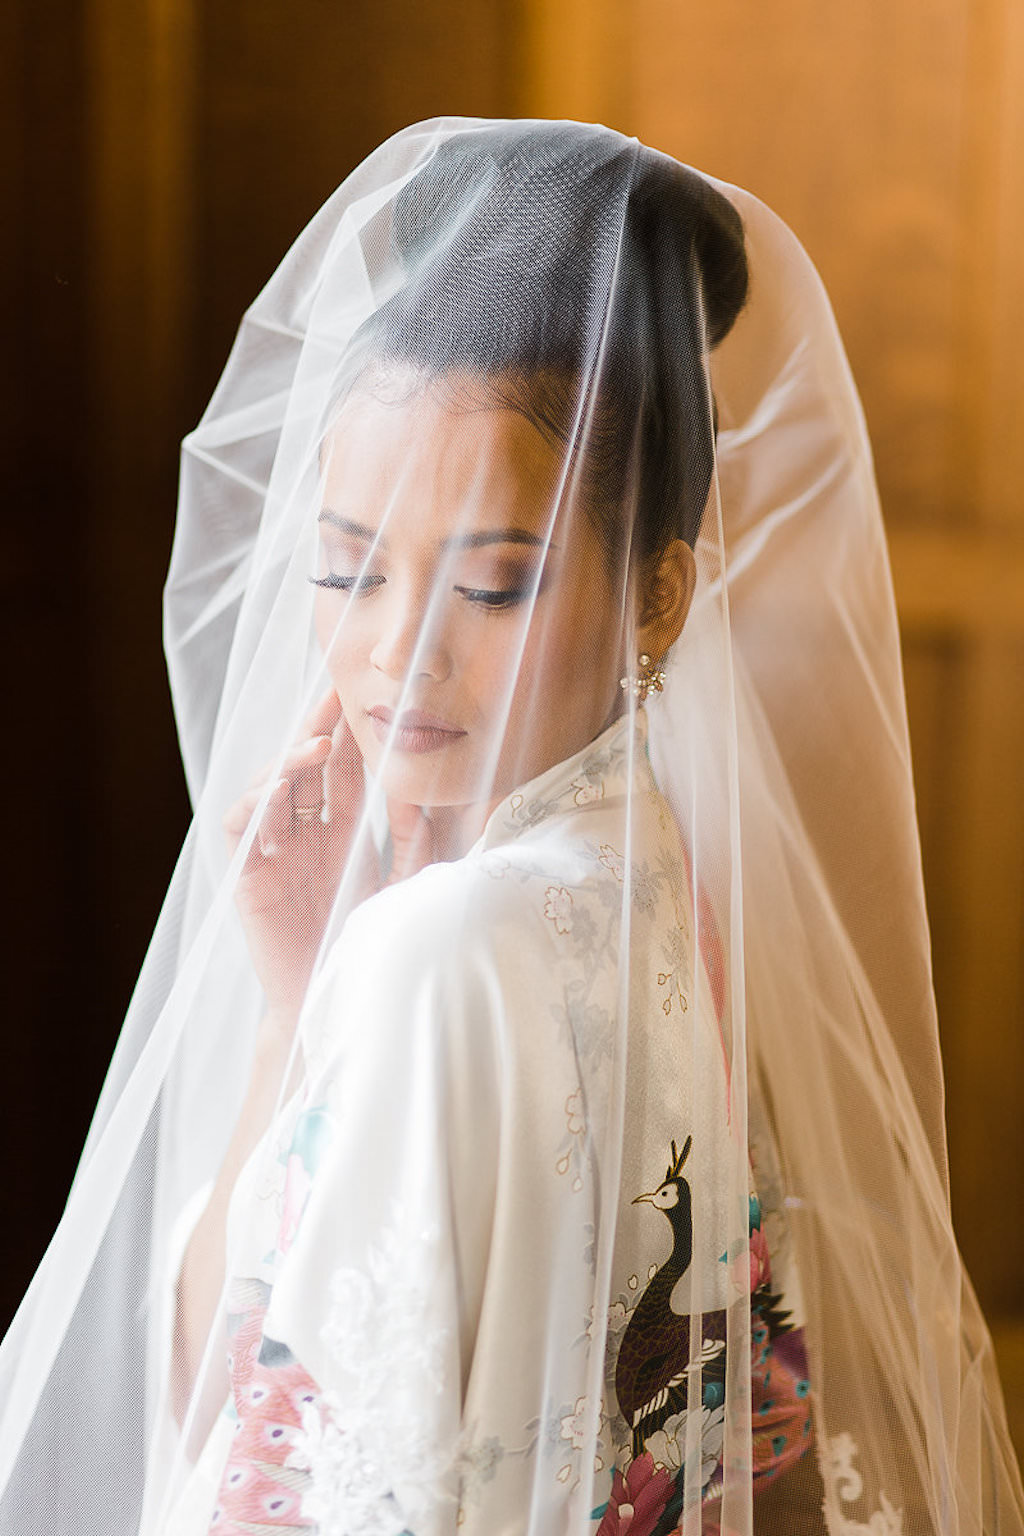 Bride Getting Ready Portrait in White Silk Kimono Robe with Stylish Bun Updo and Veil | Tampa Bay Wedding Hair and Makeup Michele Renee The Studio